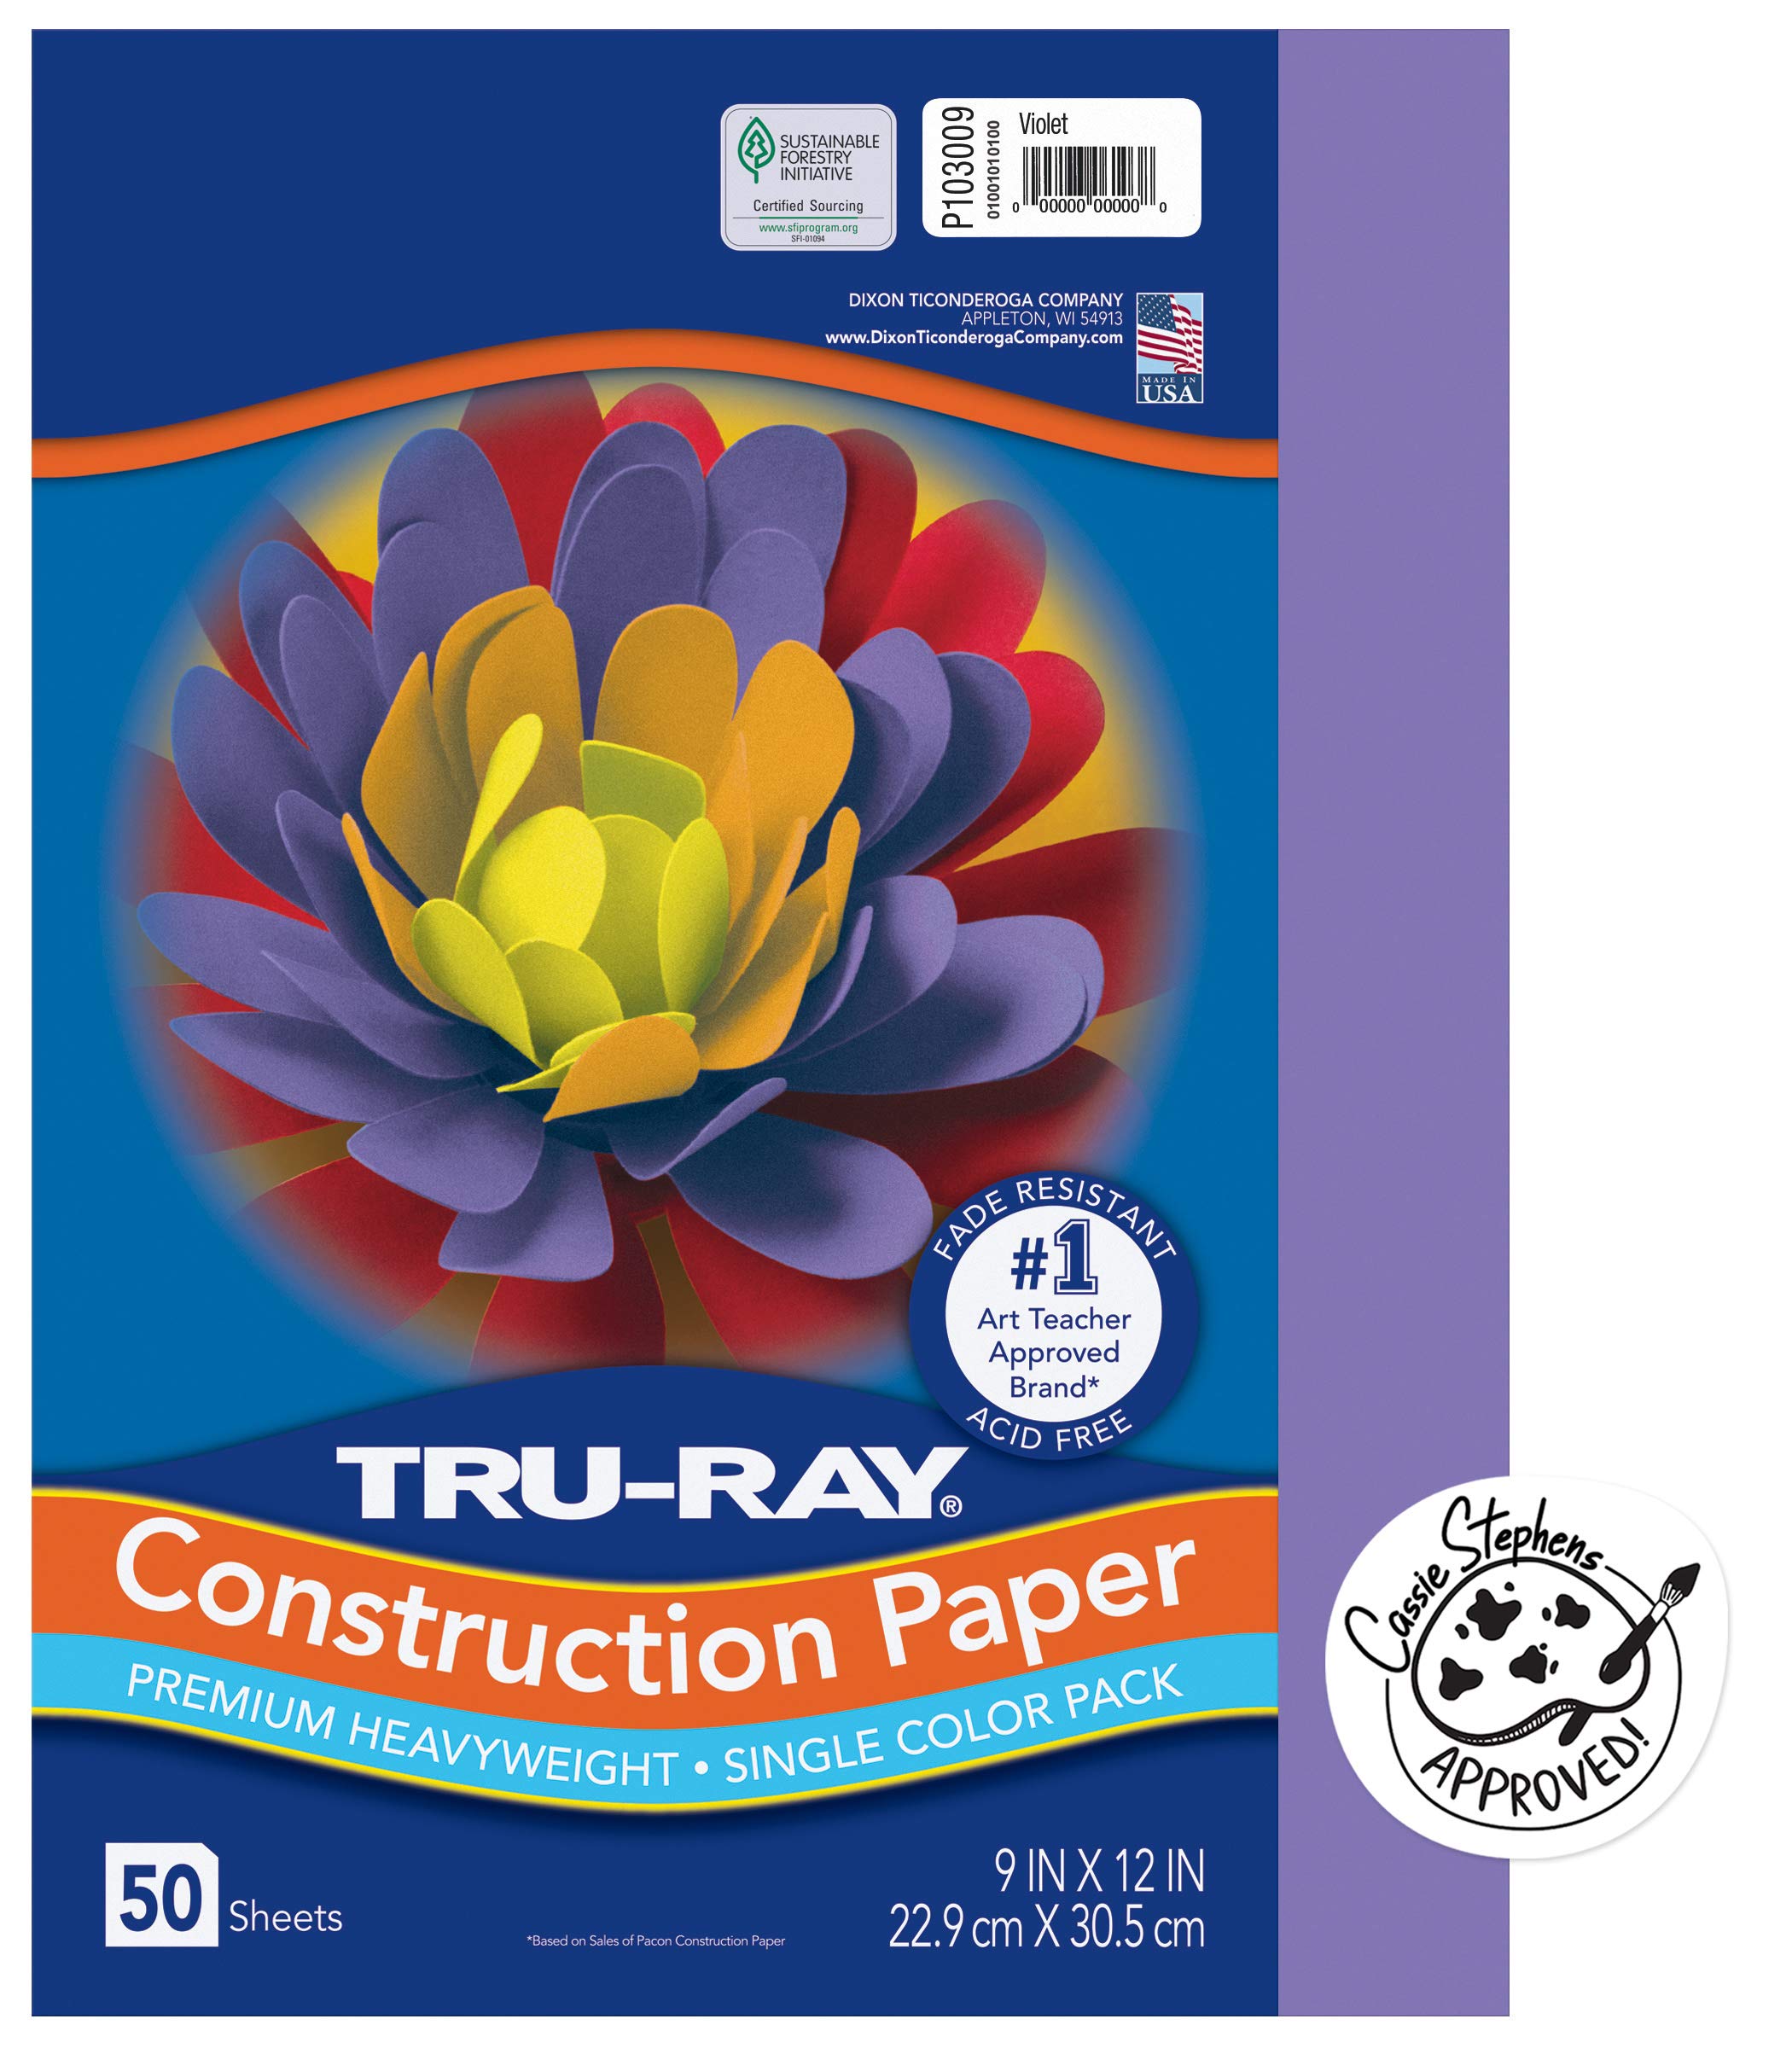 Tru-Ray Sulphite Construction Paper, 9 x 12 Inches, Lilac, 50 Sheets